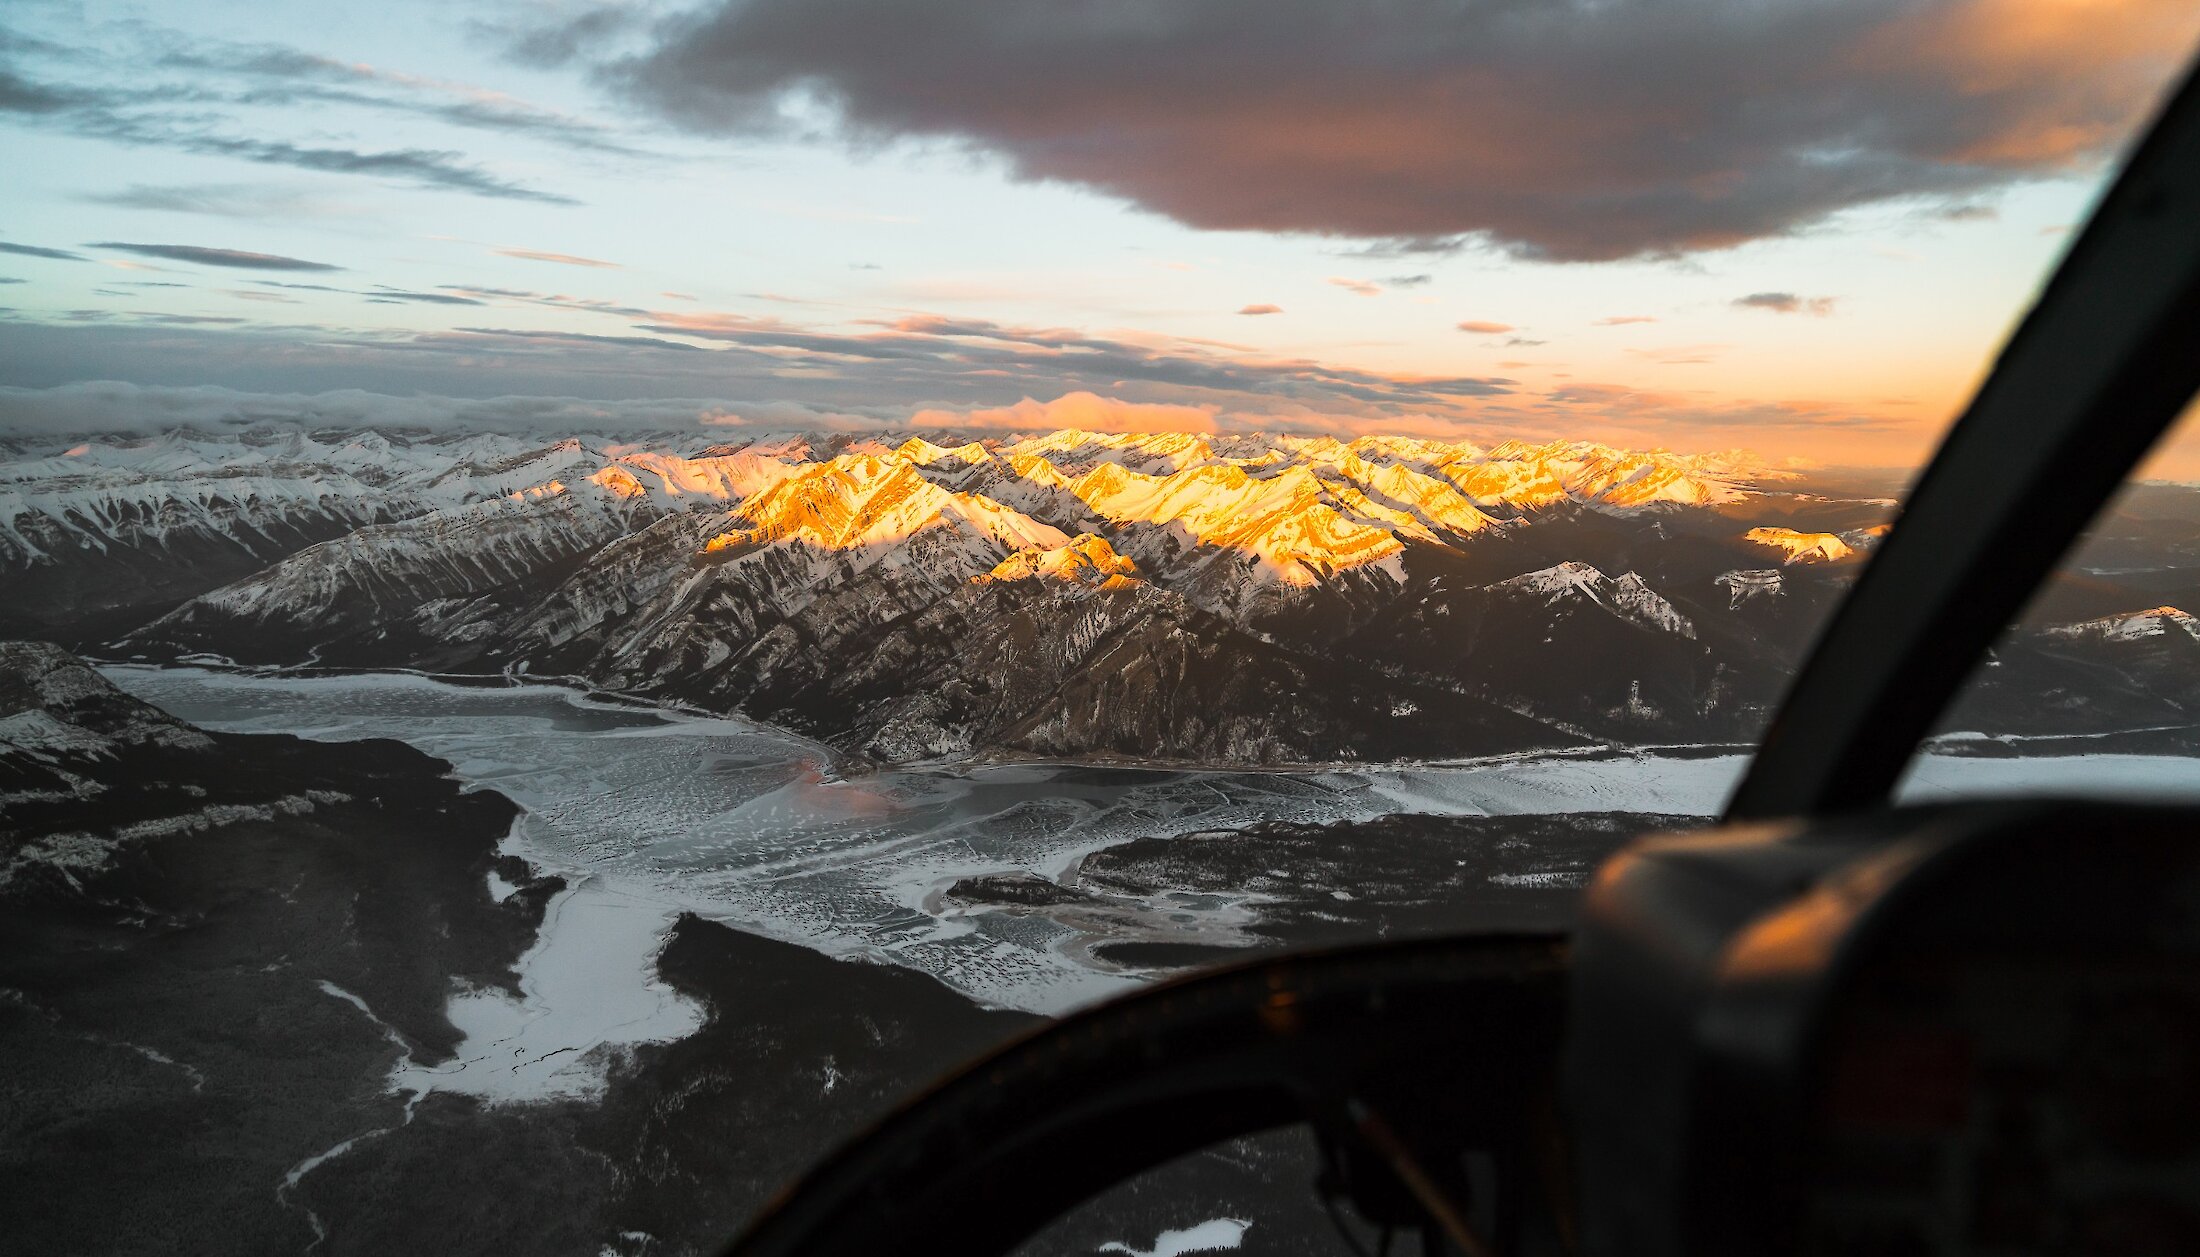 Views from a helicopter ride in winter